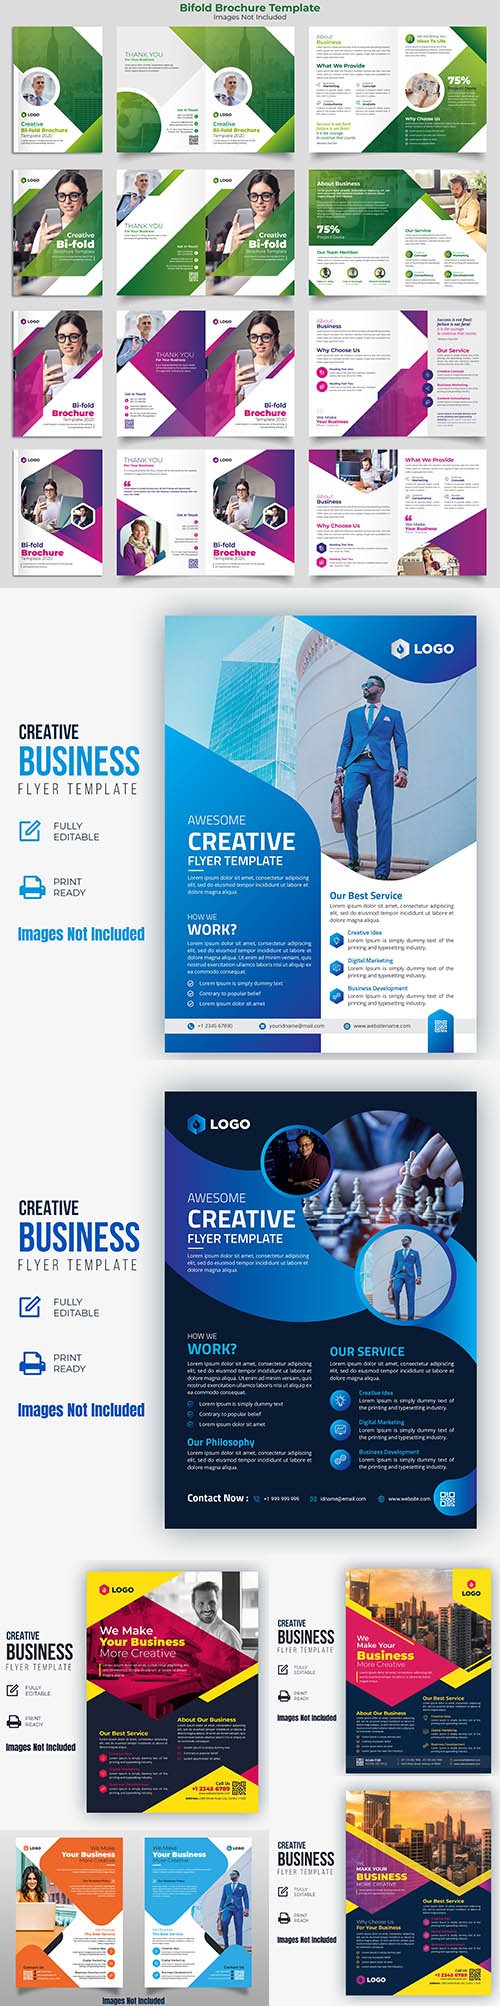 Bifold Brochure Template and Creative Business Flyer Pack